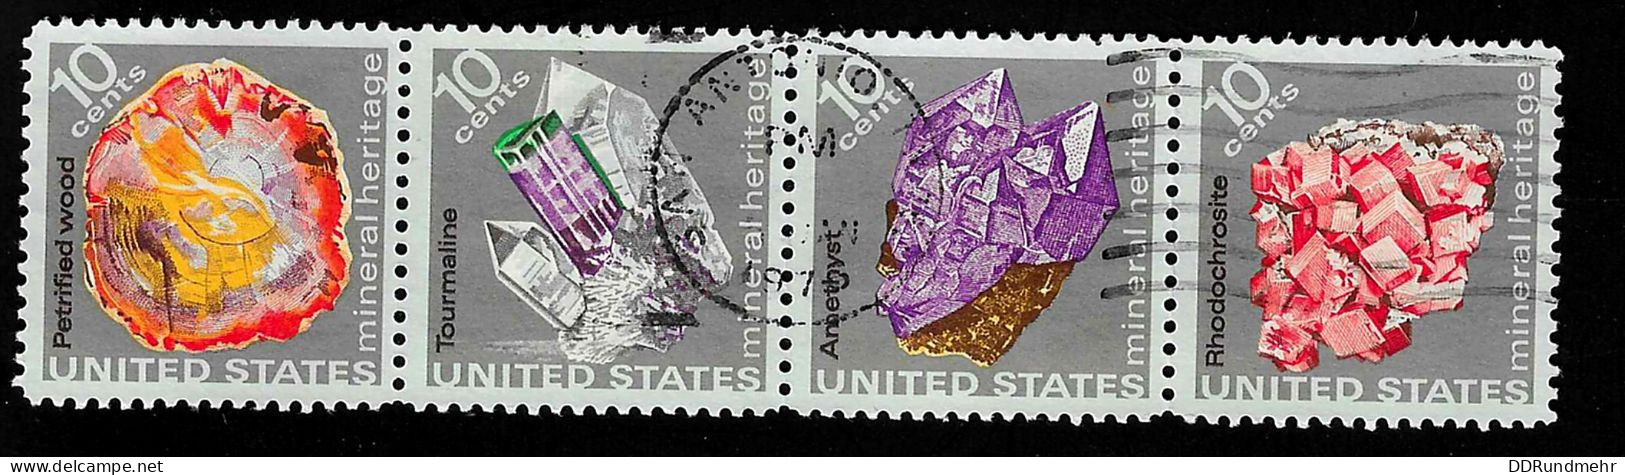 1974 Minerals Michel US 1145 - 1148 Stamp Number US 1540 - 1543 Yvert Et Tellier US 1025 - 1028 Used - Used Stamps